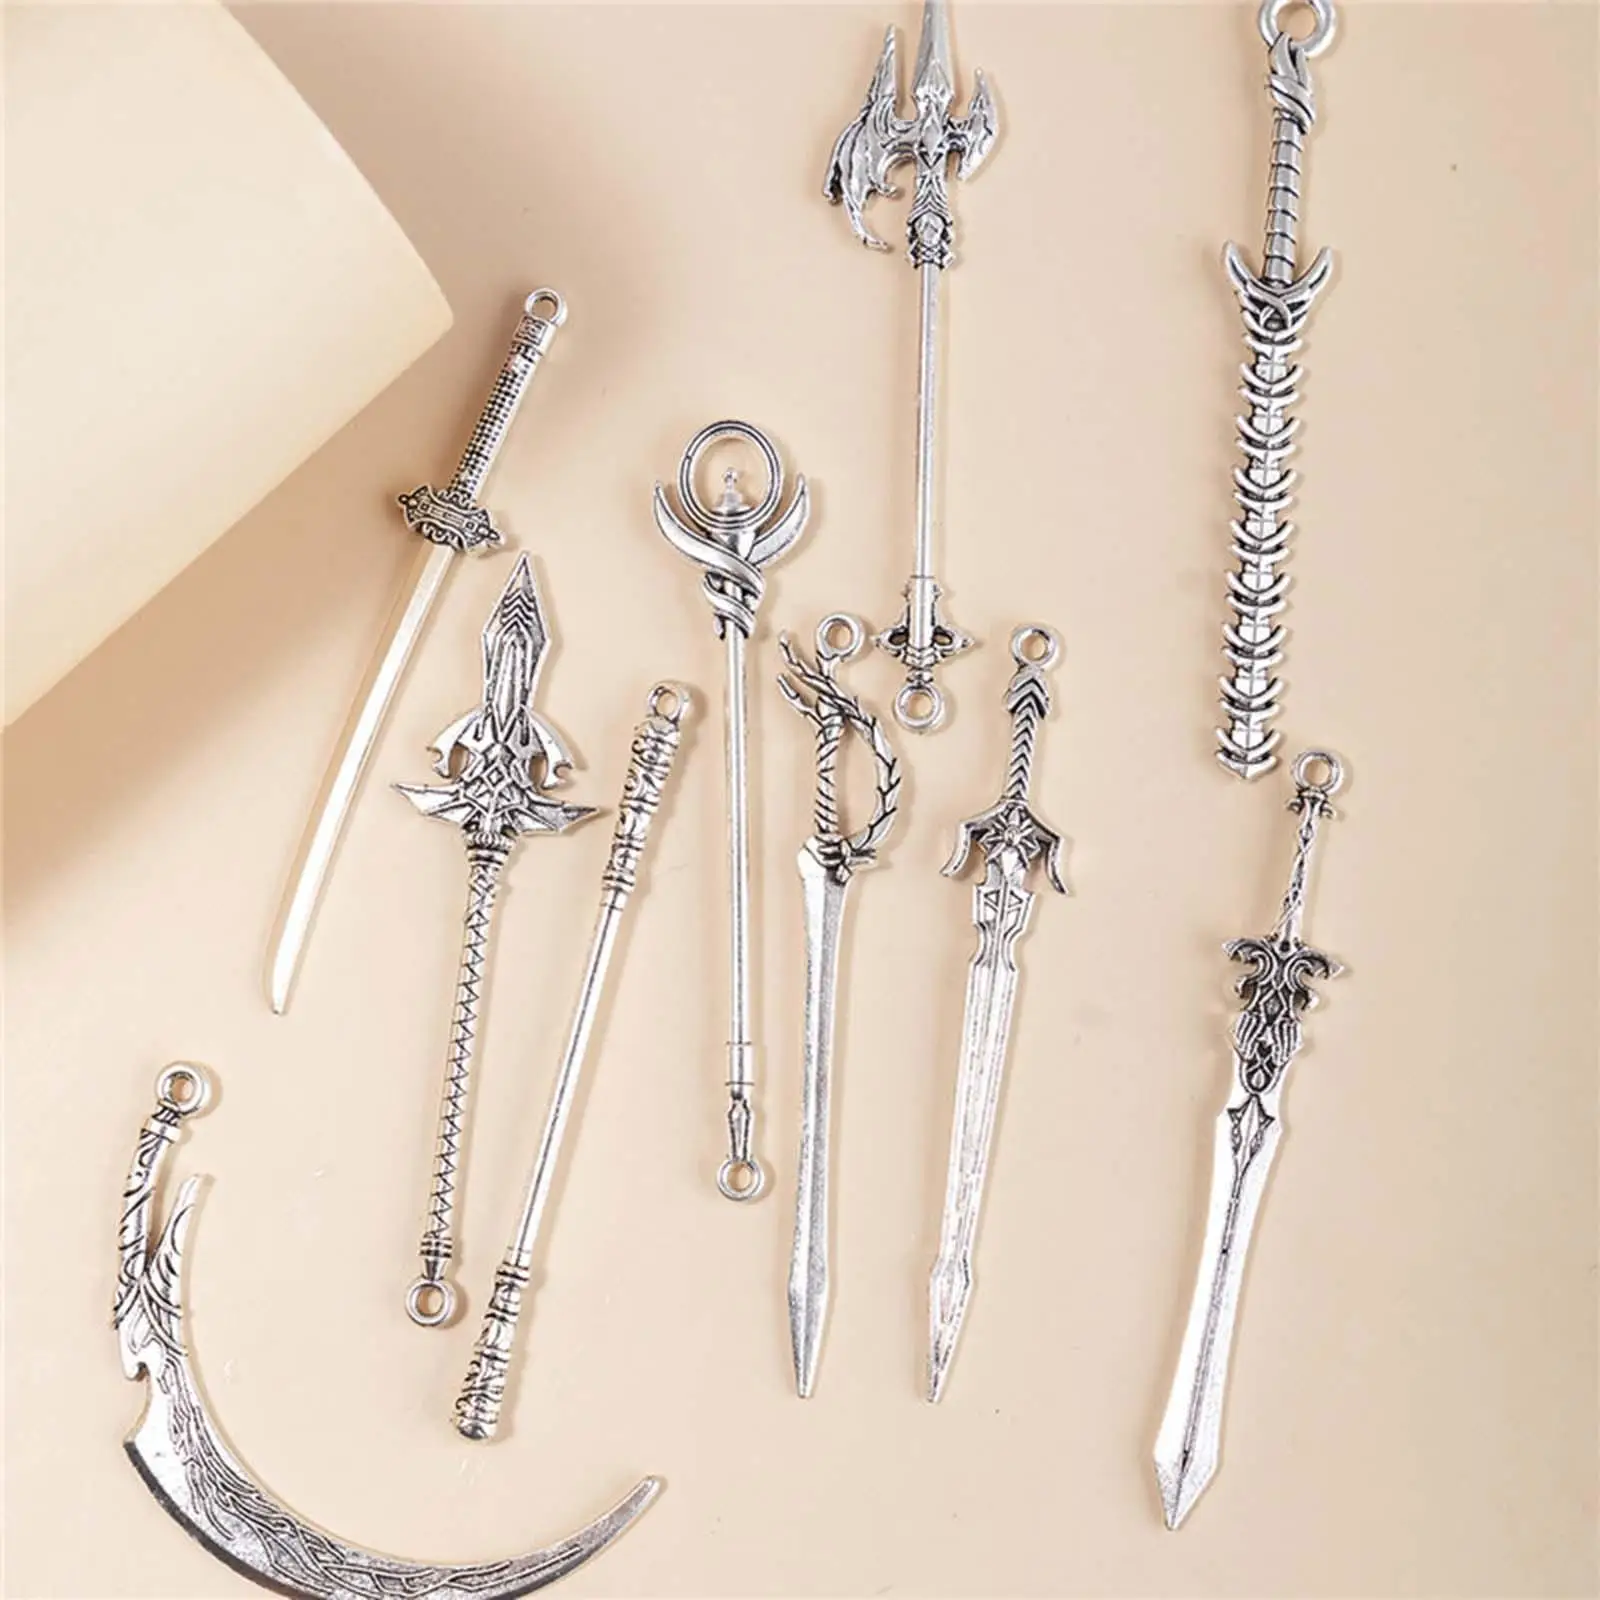 

10x Retro Knight Sword Cosplay Scense Props Set Key Chain Toy Pendants Bookmark for Club Bedroom Household School Living Room